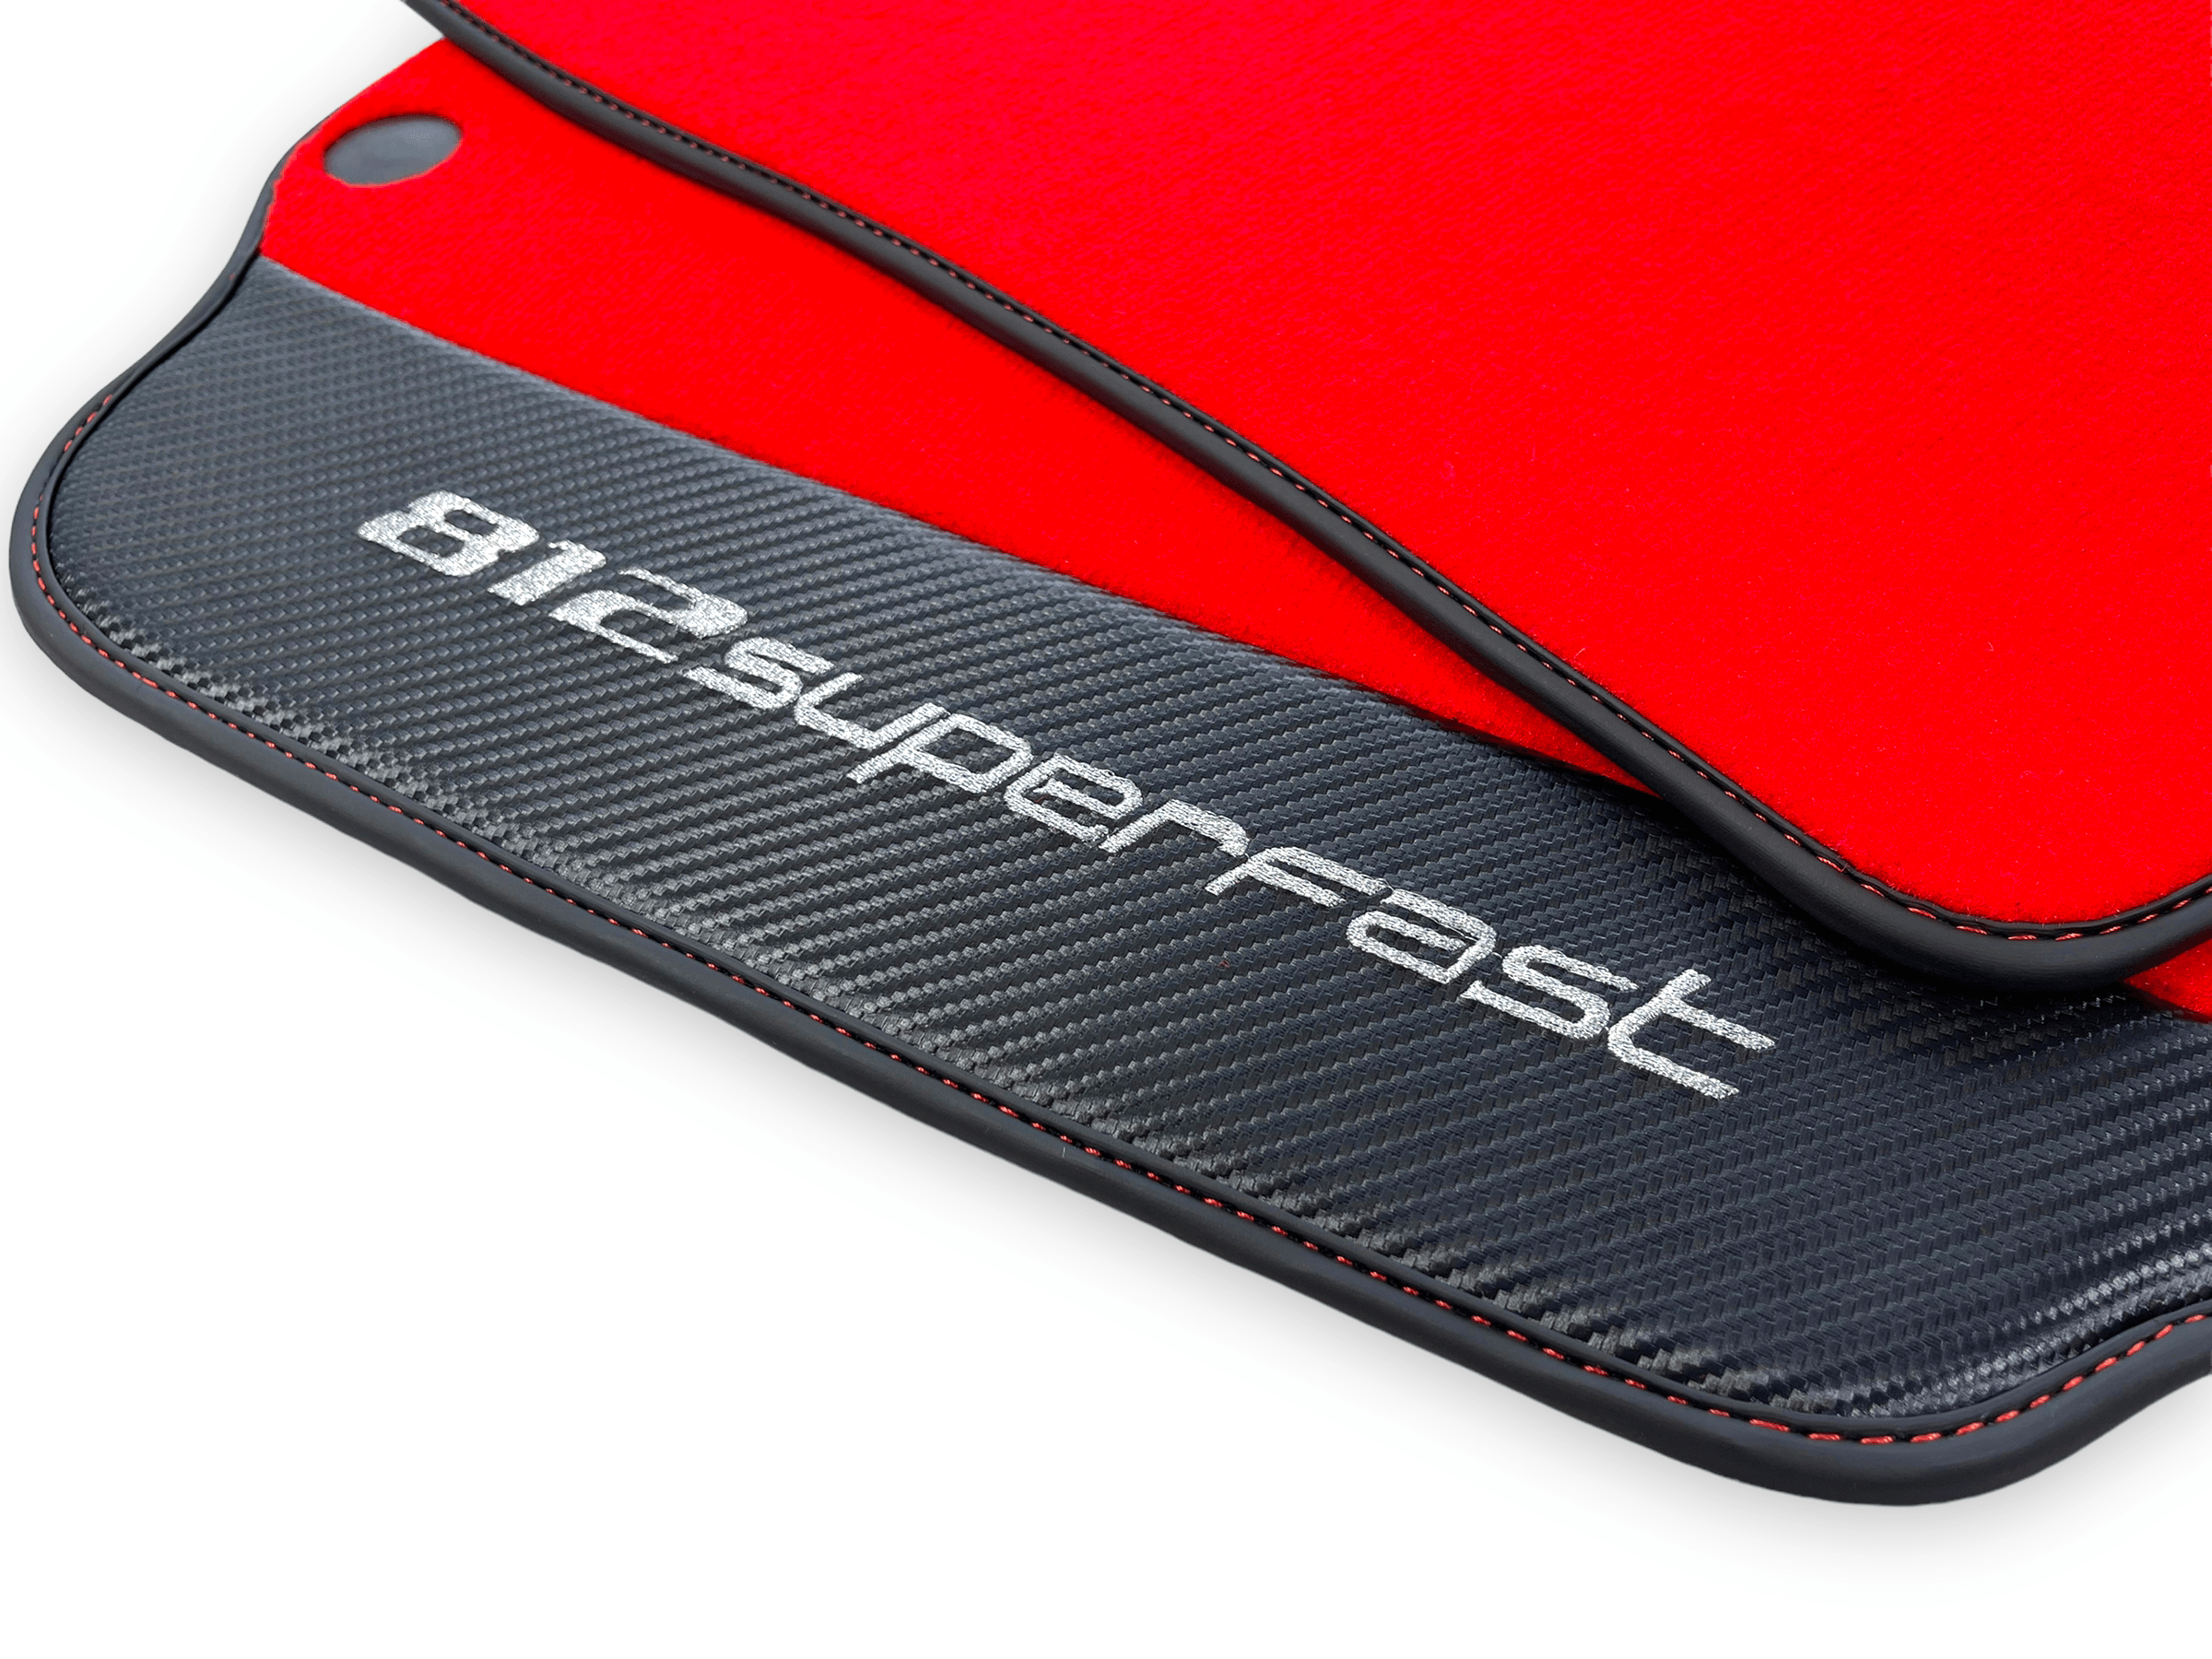 Red Floor Mats For Ferrari 812 Superfast With Carbon Fiber Leather - AutoWin